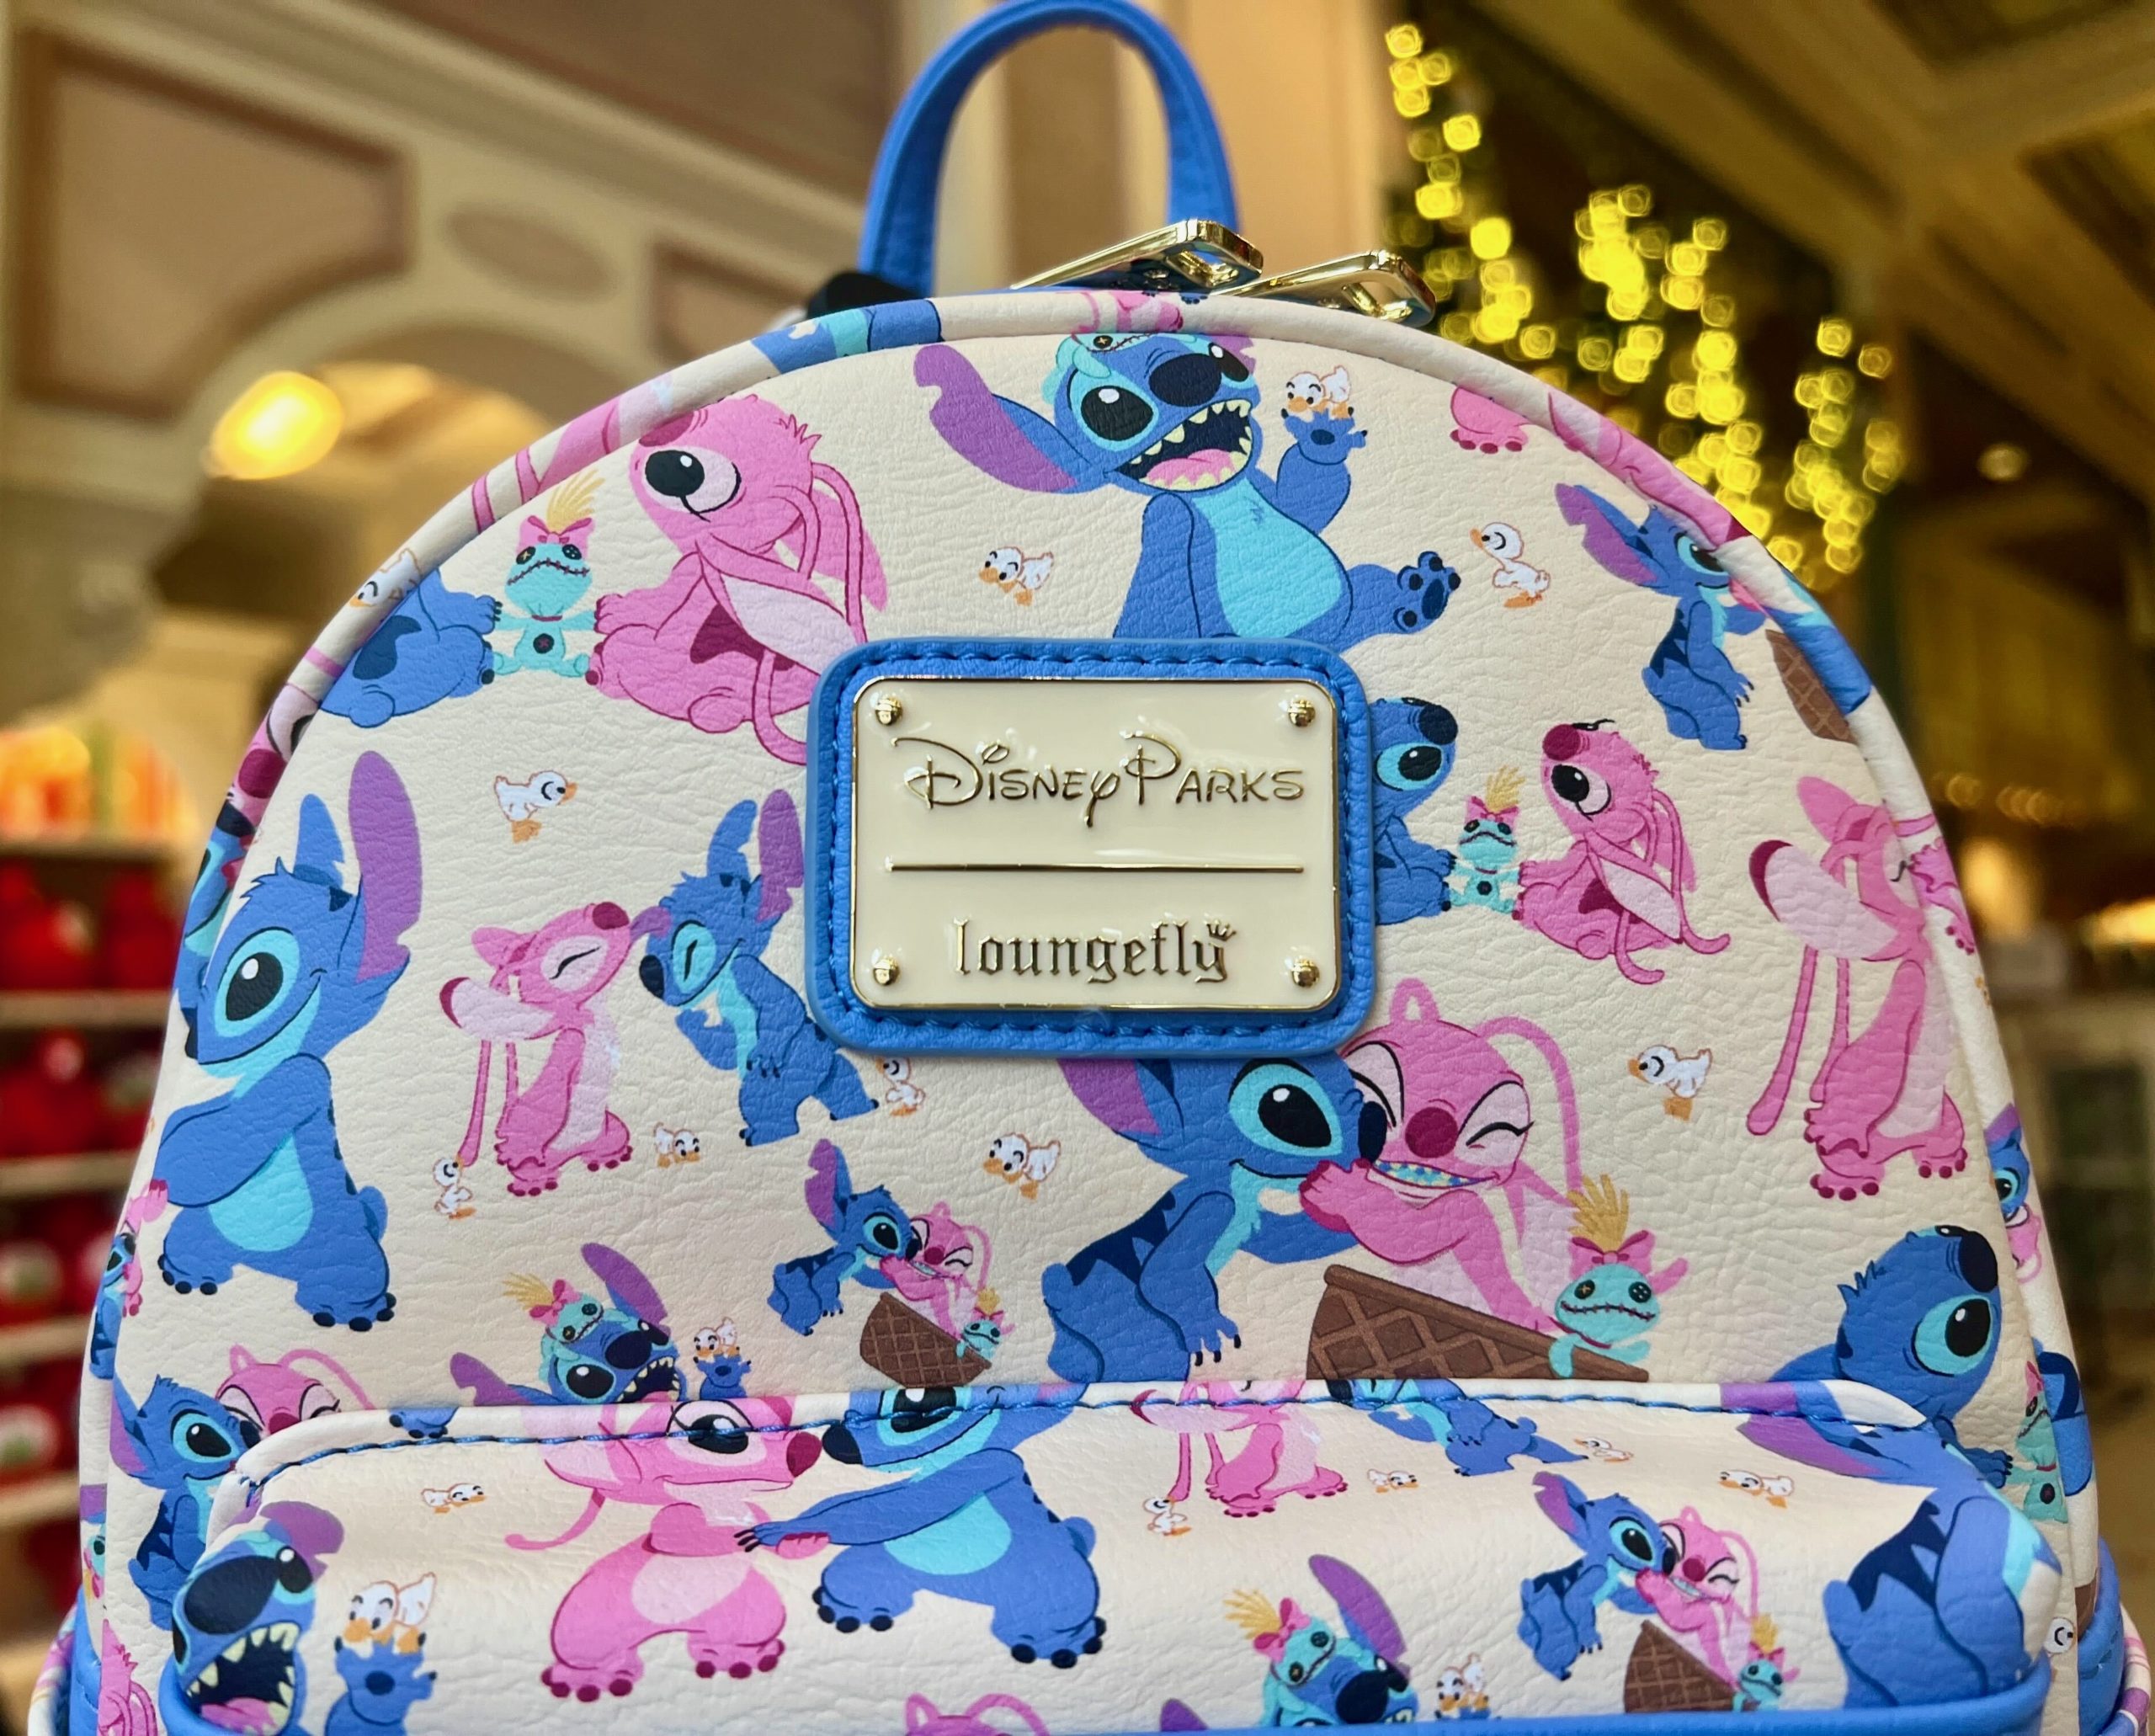 NEW! Stitch merch and more available inside World of Disney as of 12/3, Disney Loungefly